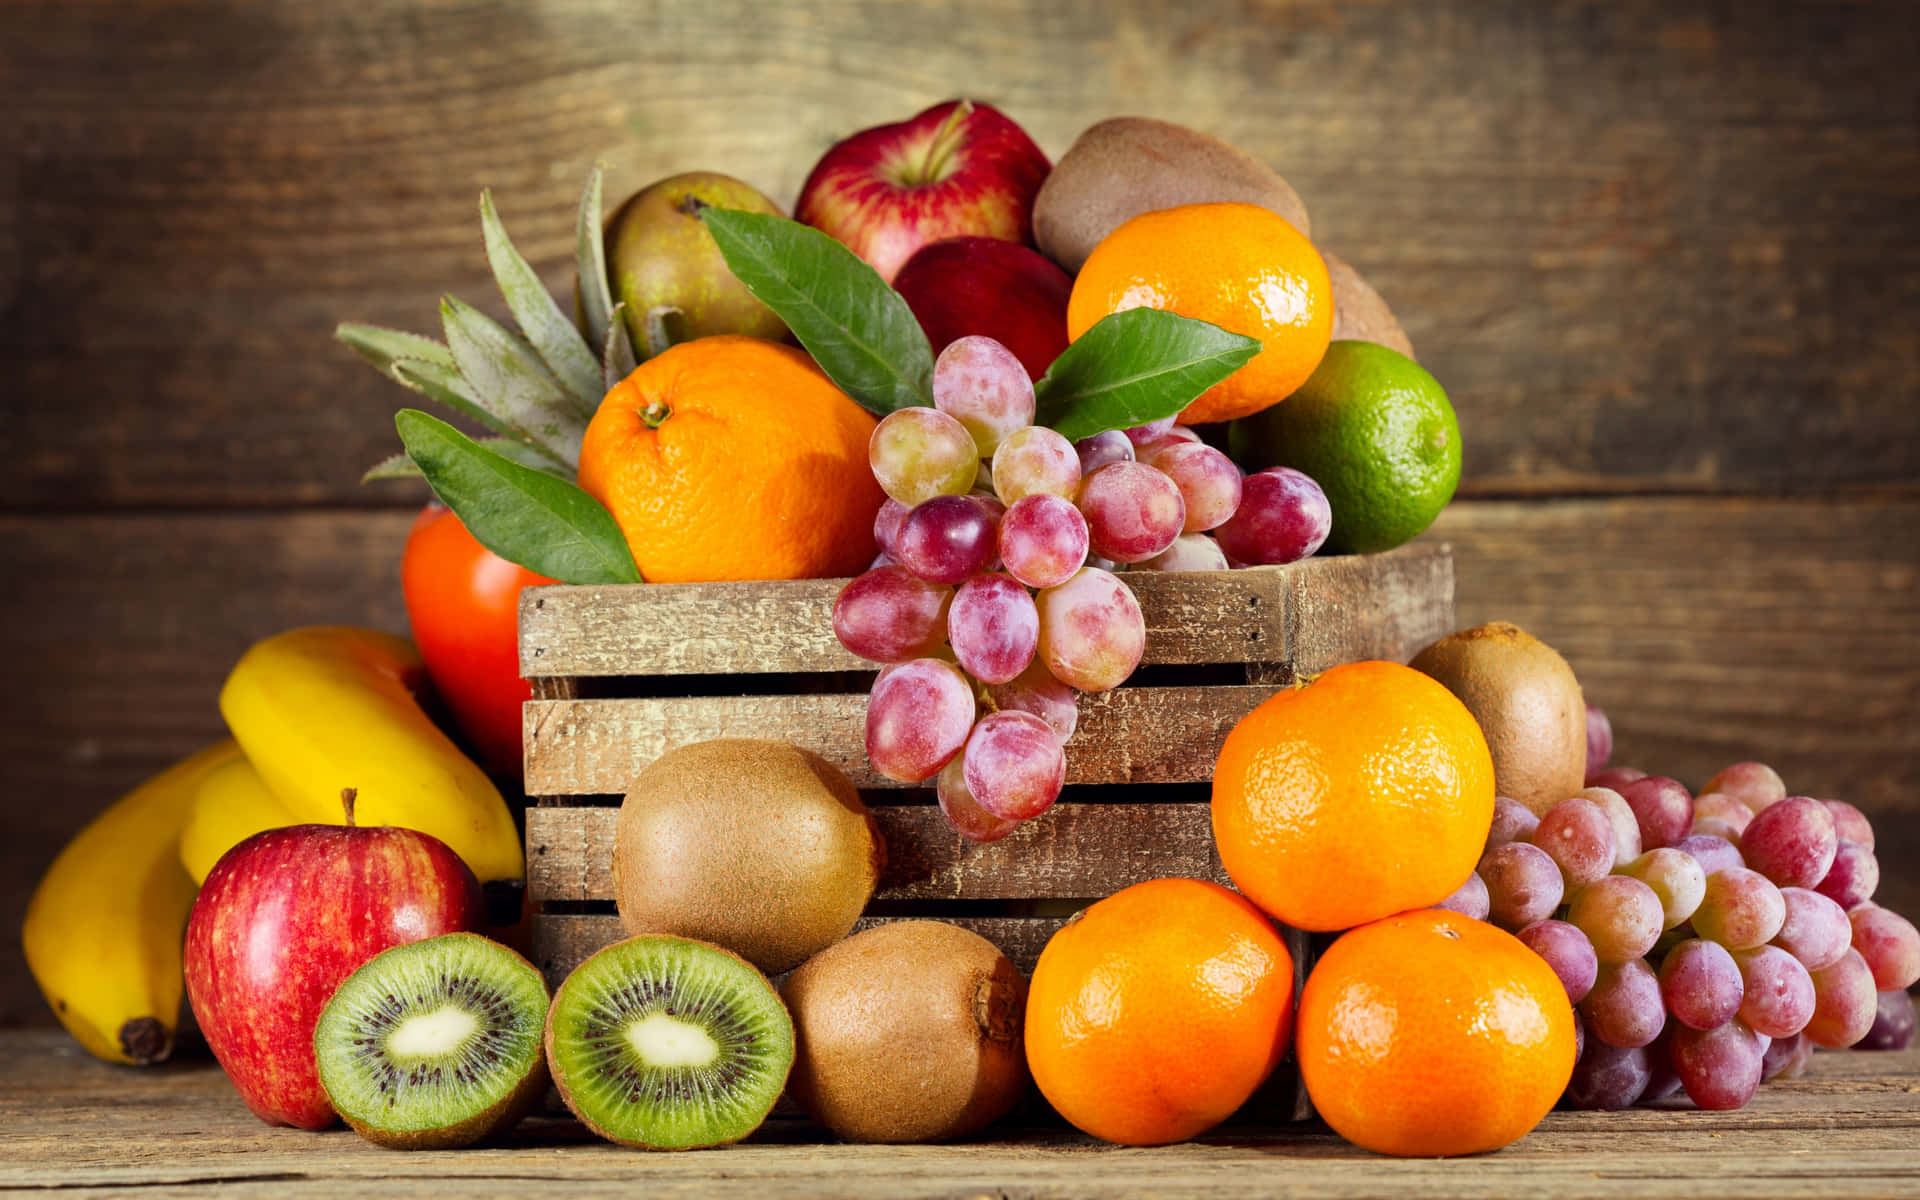 Free Fruits And Vegetables Wallpaper Downloads, Fruits And Vegetables Wallpaper for FREE